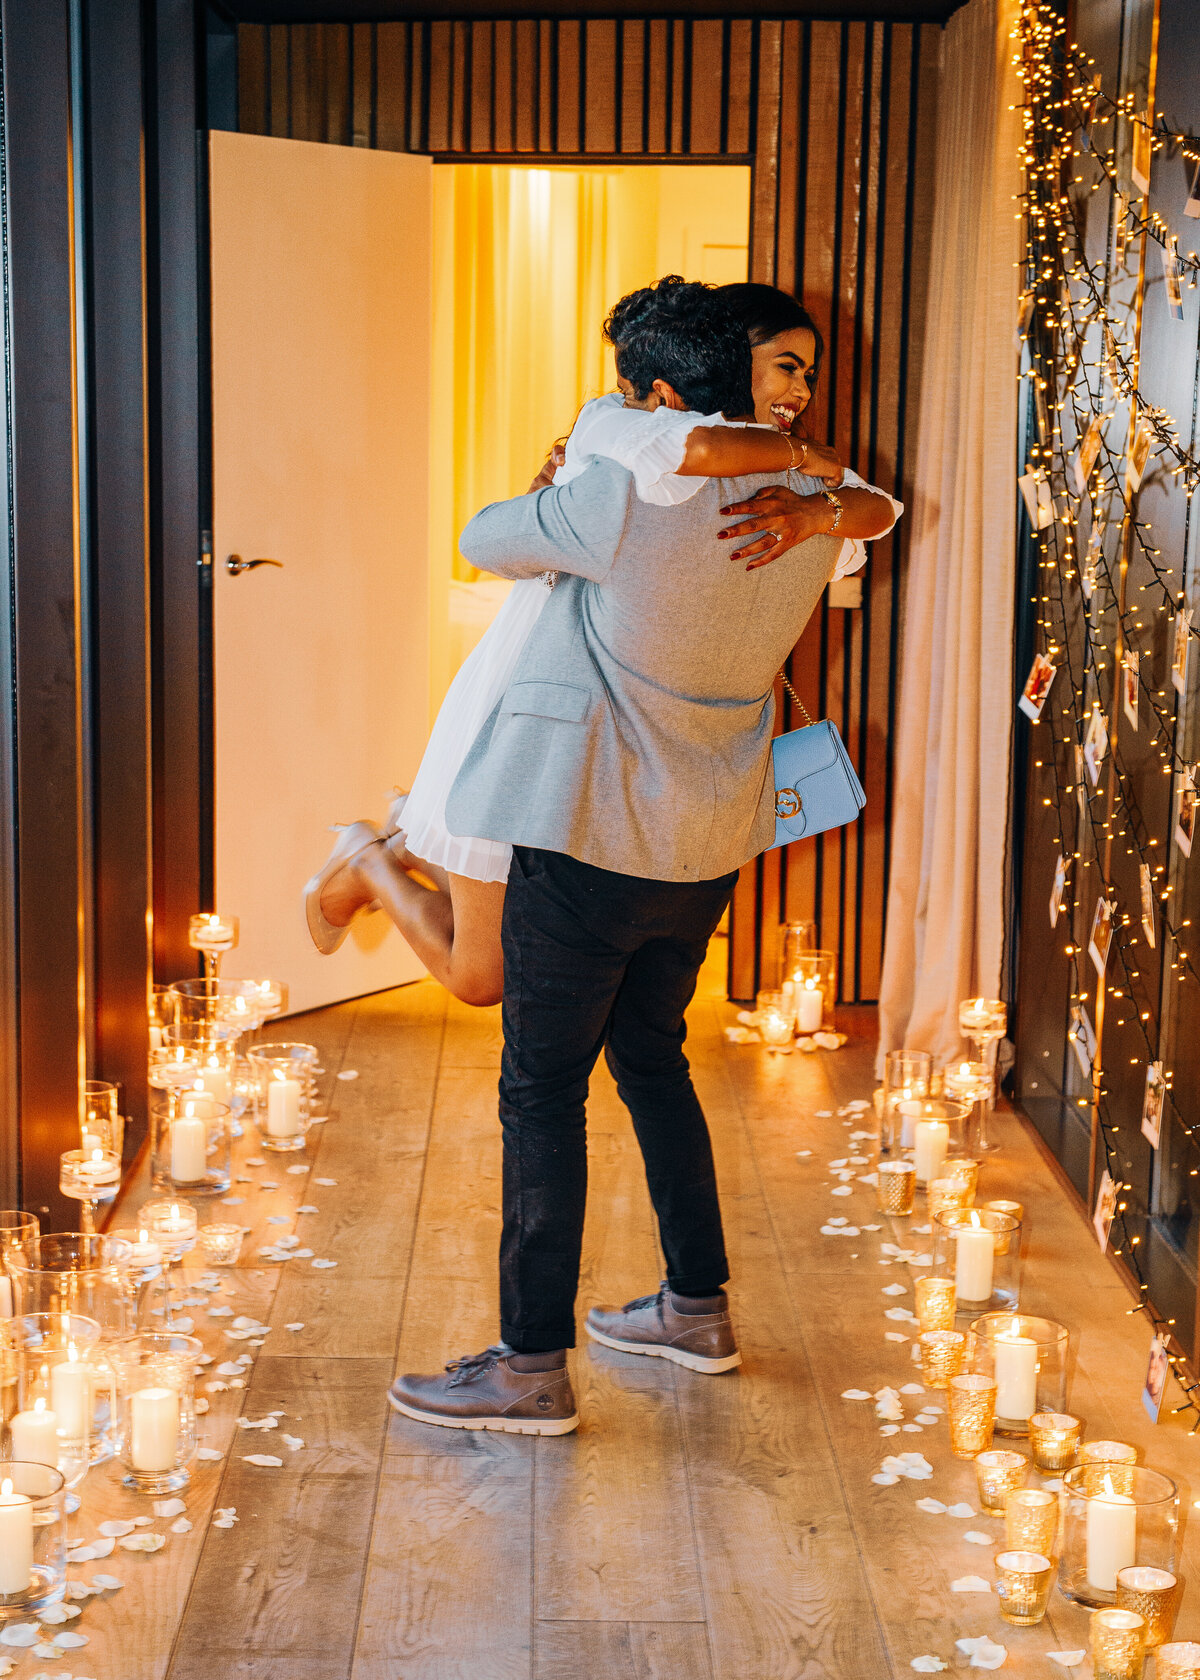 A couple embrace after getting engaged in a candlelit hallway with polaroids strung on fairy lights.